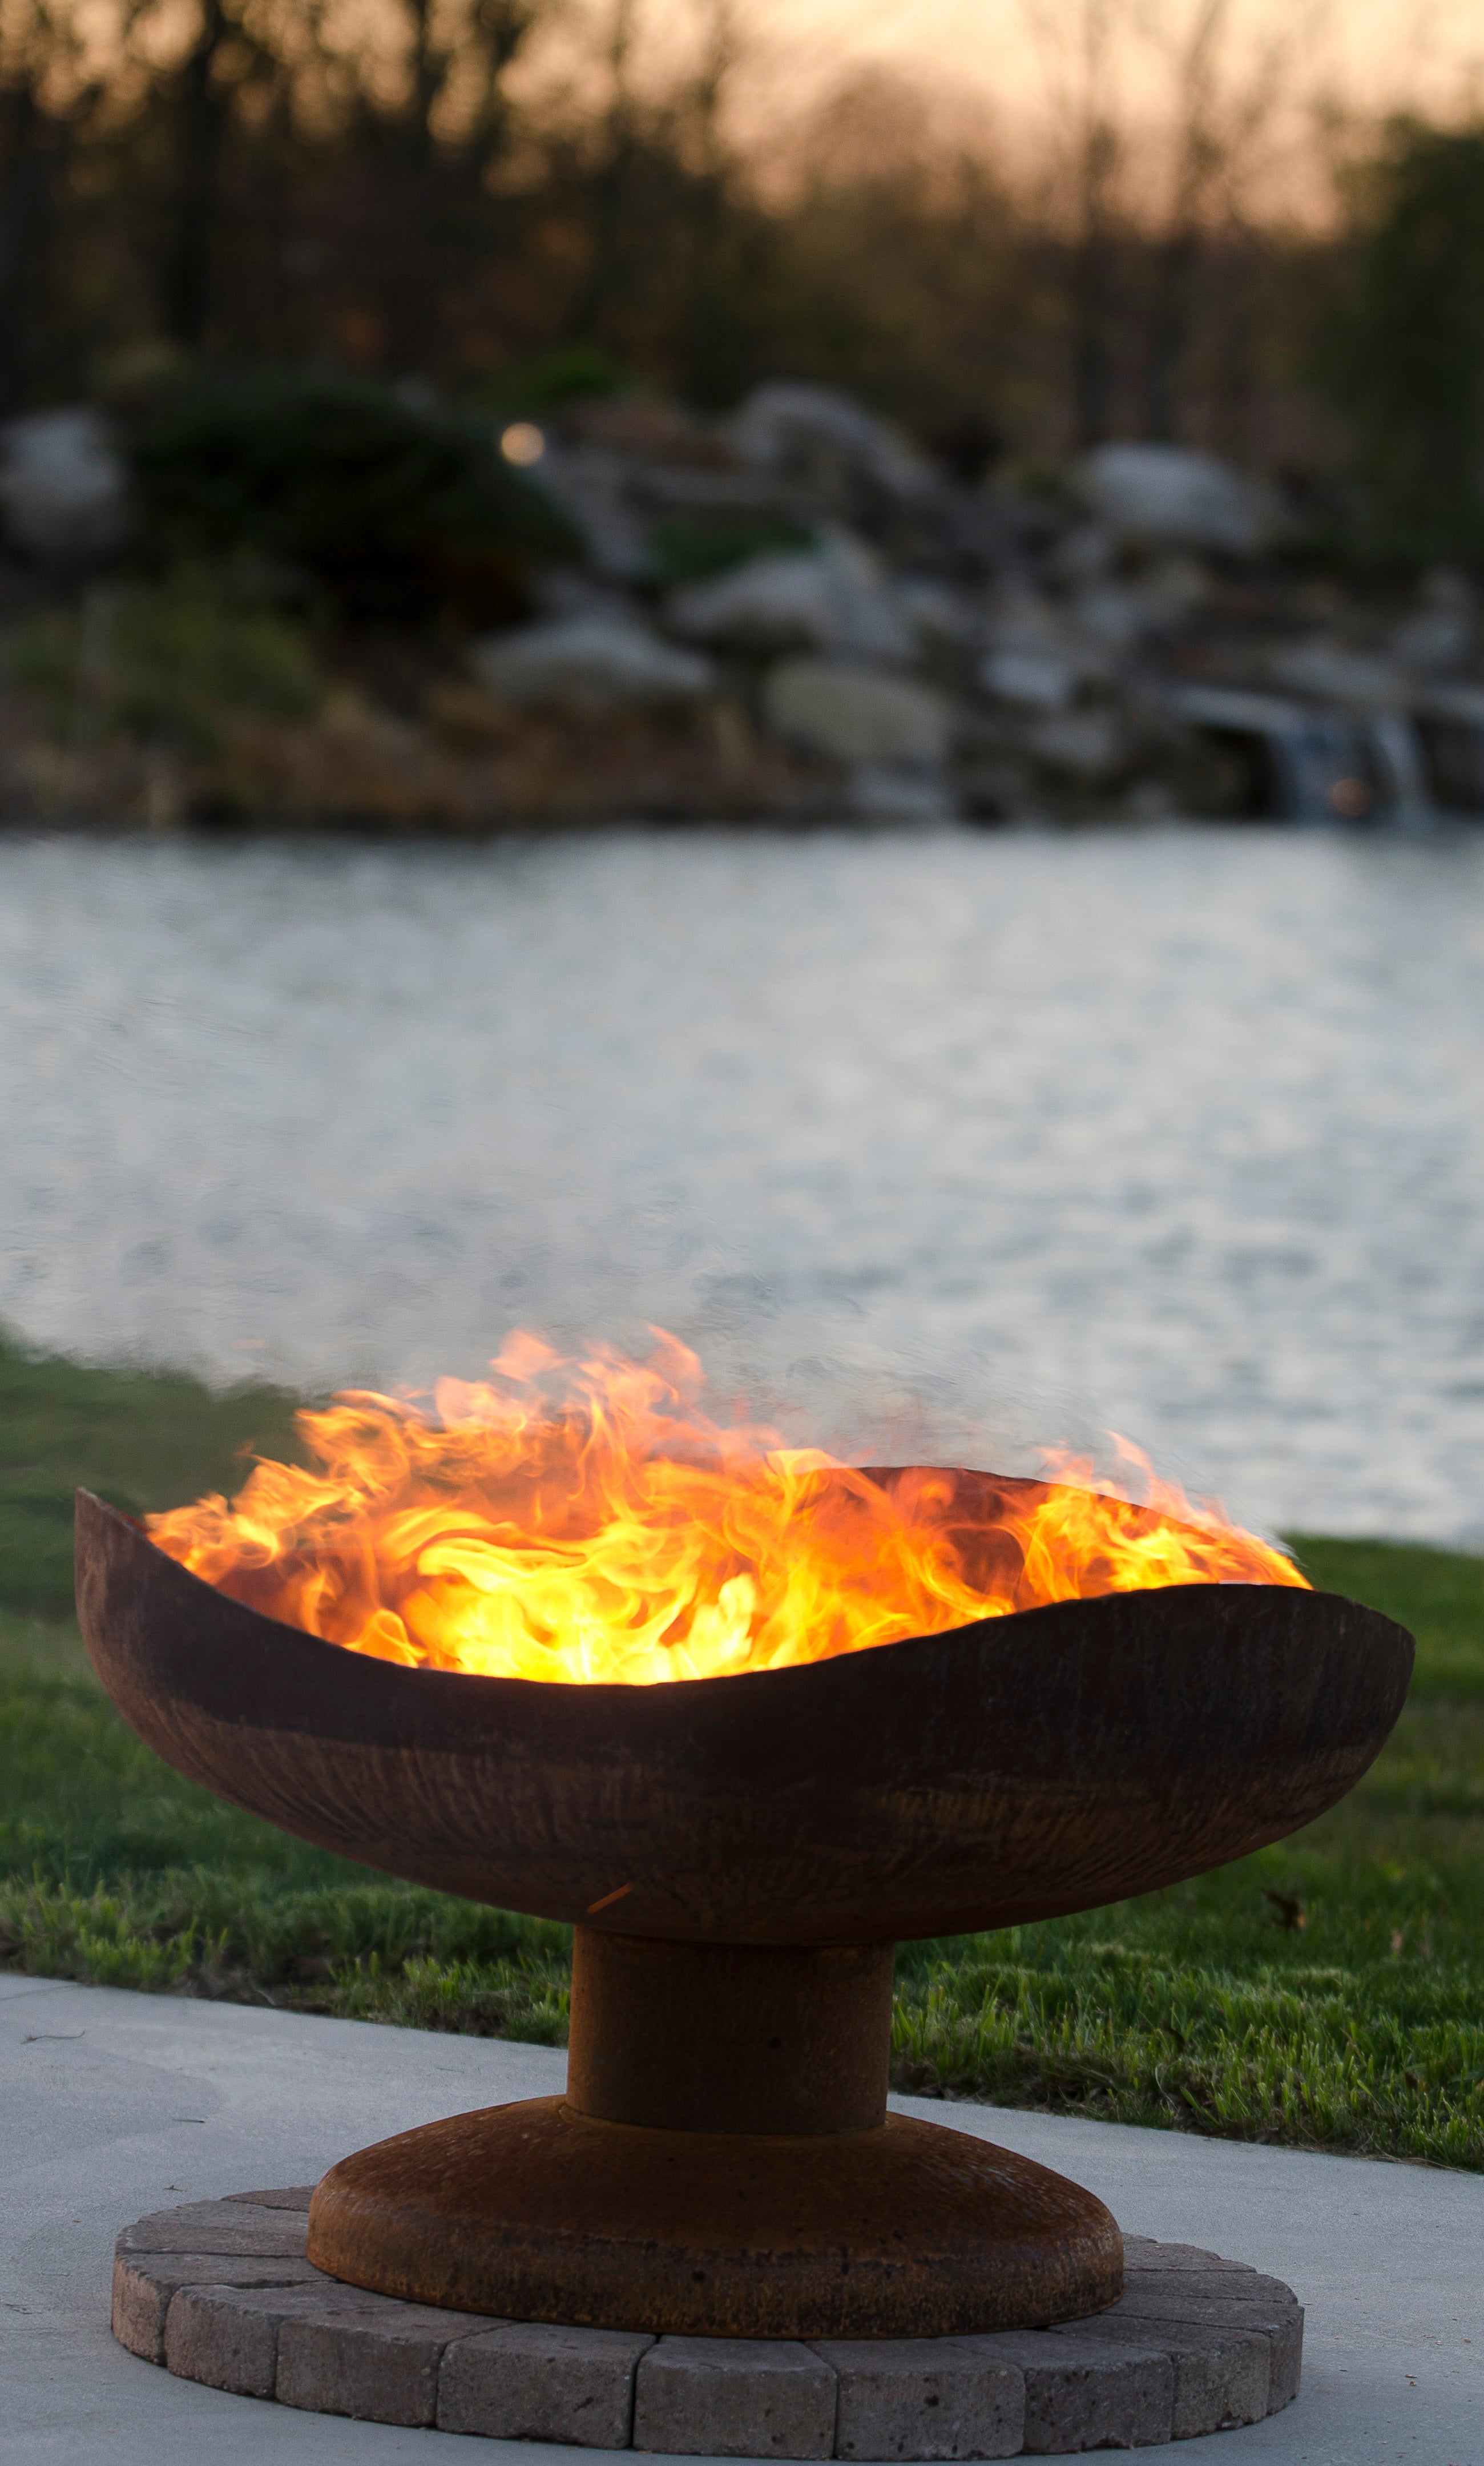 The Fire Pit Gallery Sand Dune Firebowl – Fire Pit